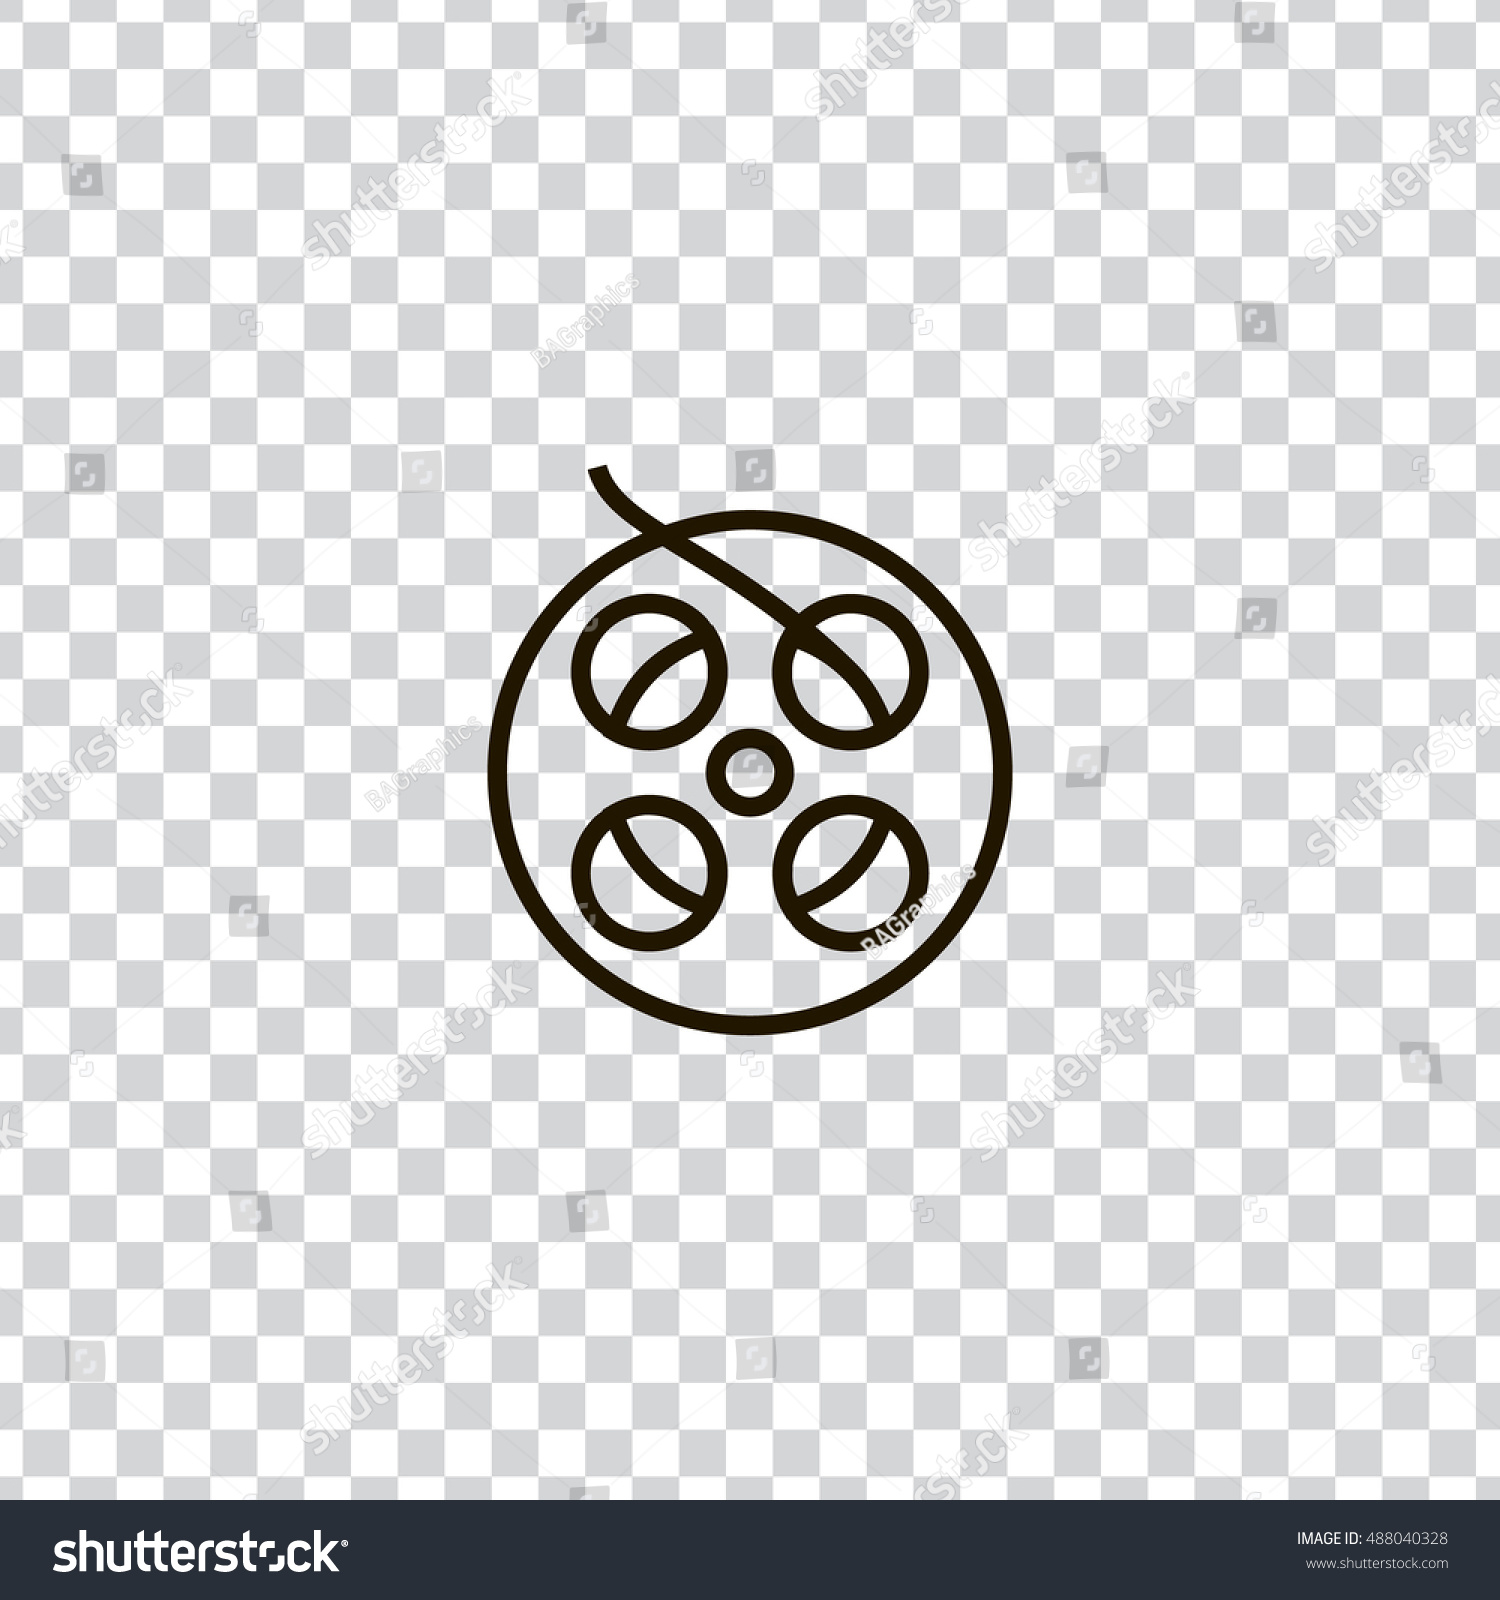 SVG of Film reel icon vector, clip art. Also useful as logo, web UI element, symbol, graphic image, transparent silhouette and illustration. Compatible with ai, cdr, jpg, png, svg, pdf, ico and eps formats. svg